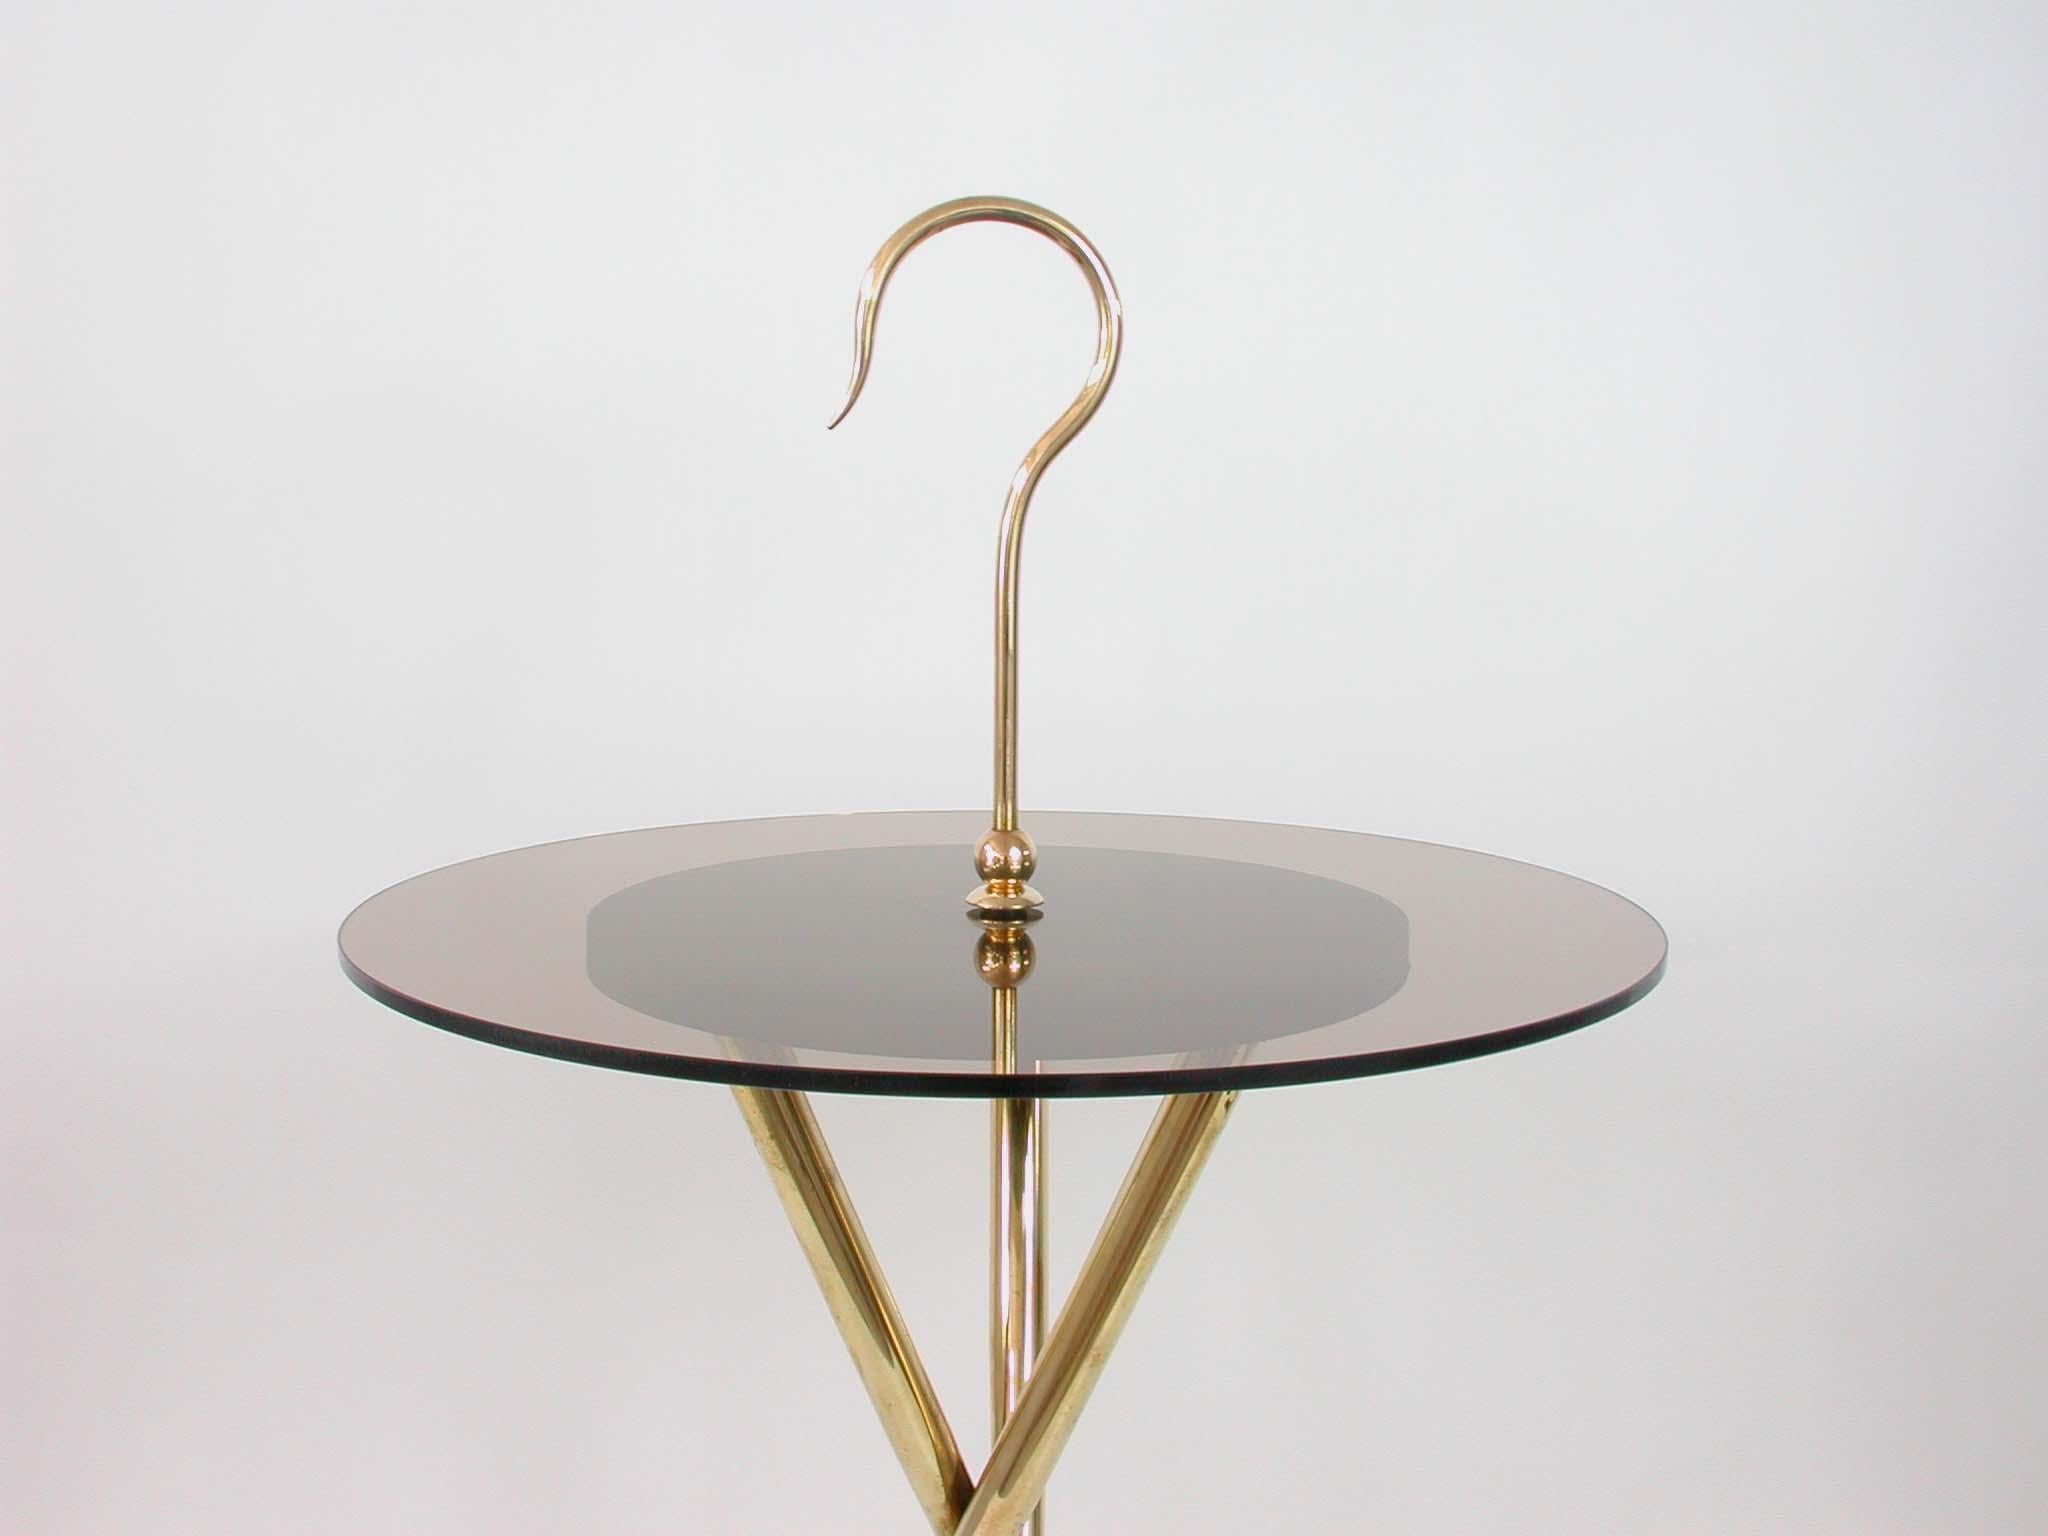 Mid-20th Century Italian Midcentury Brass and Tinted Glass Occasional Table, 1950s For Sale